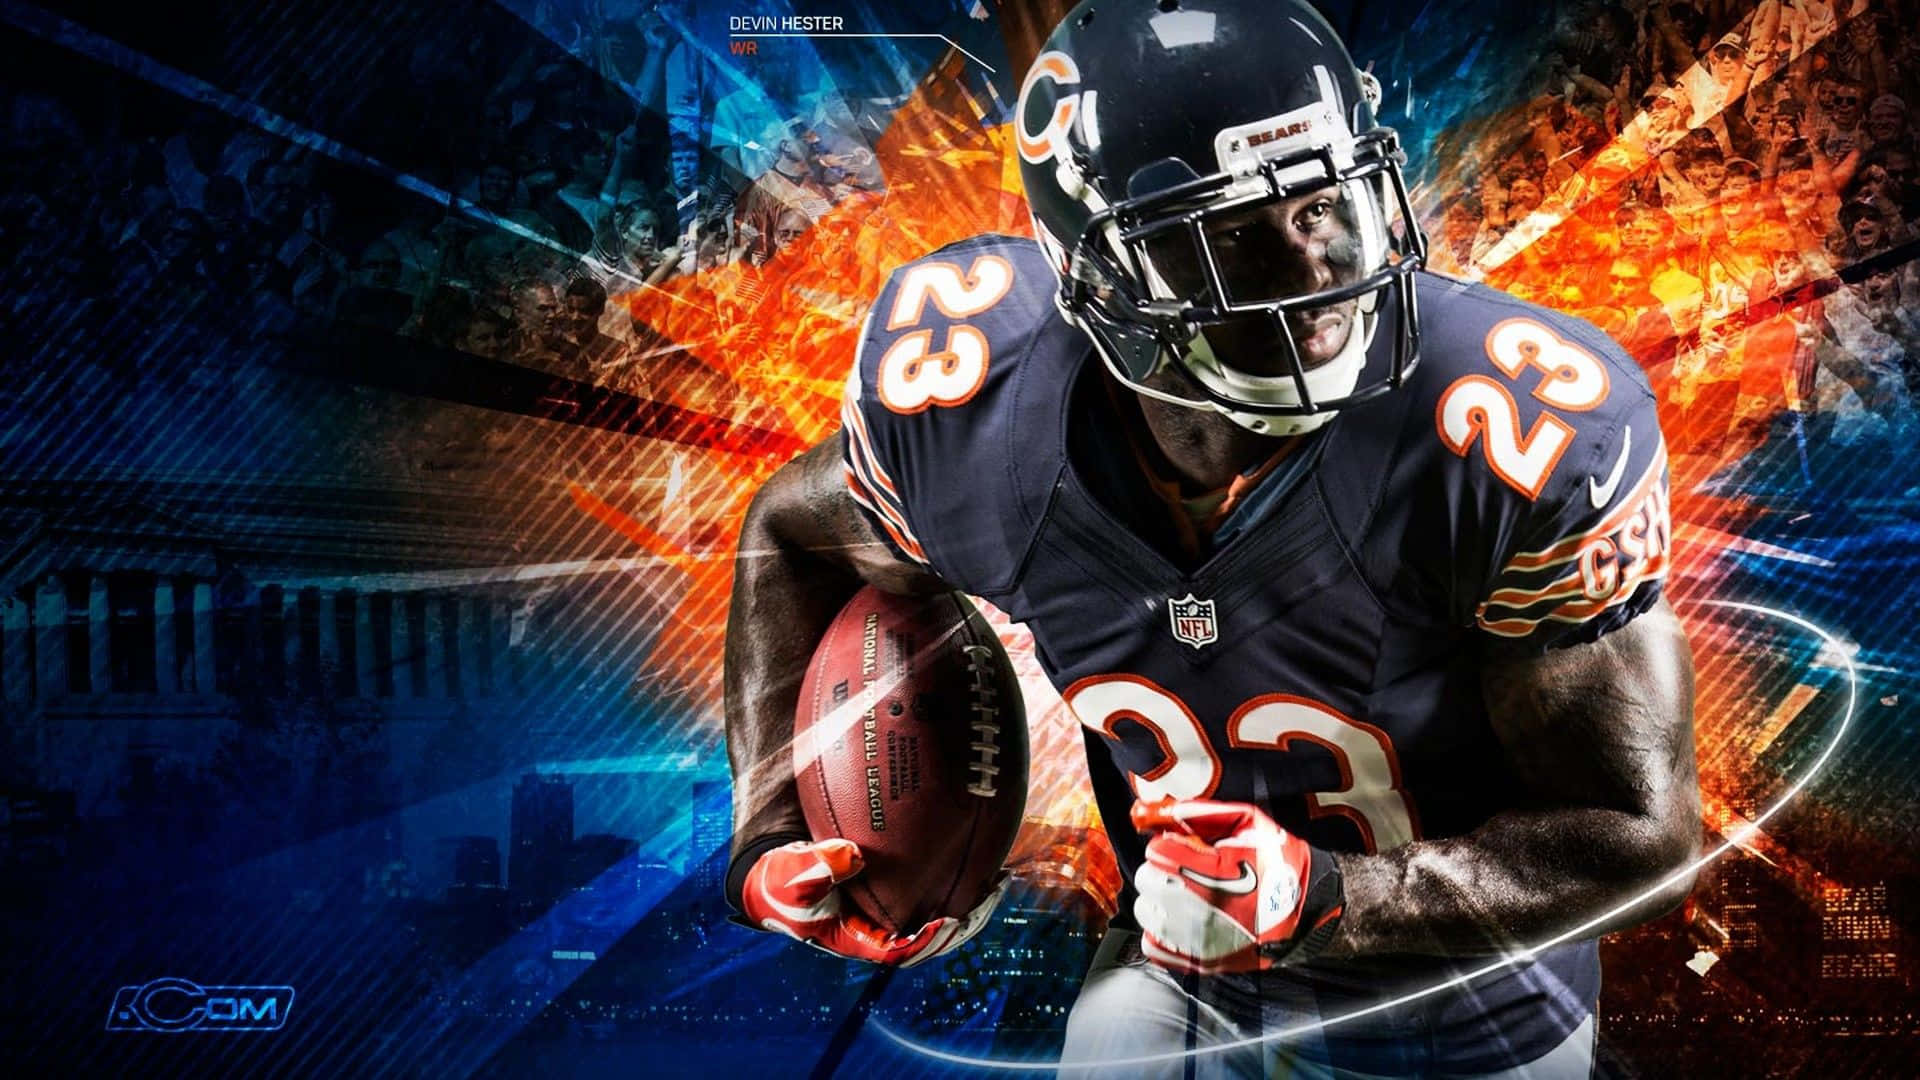 A classic view of an HD NFL game Wallpaper